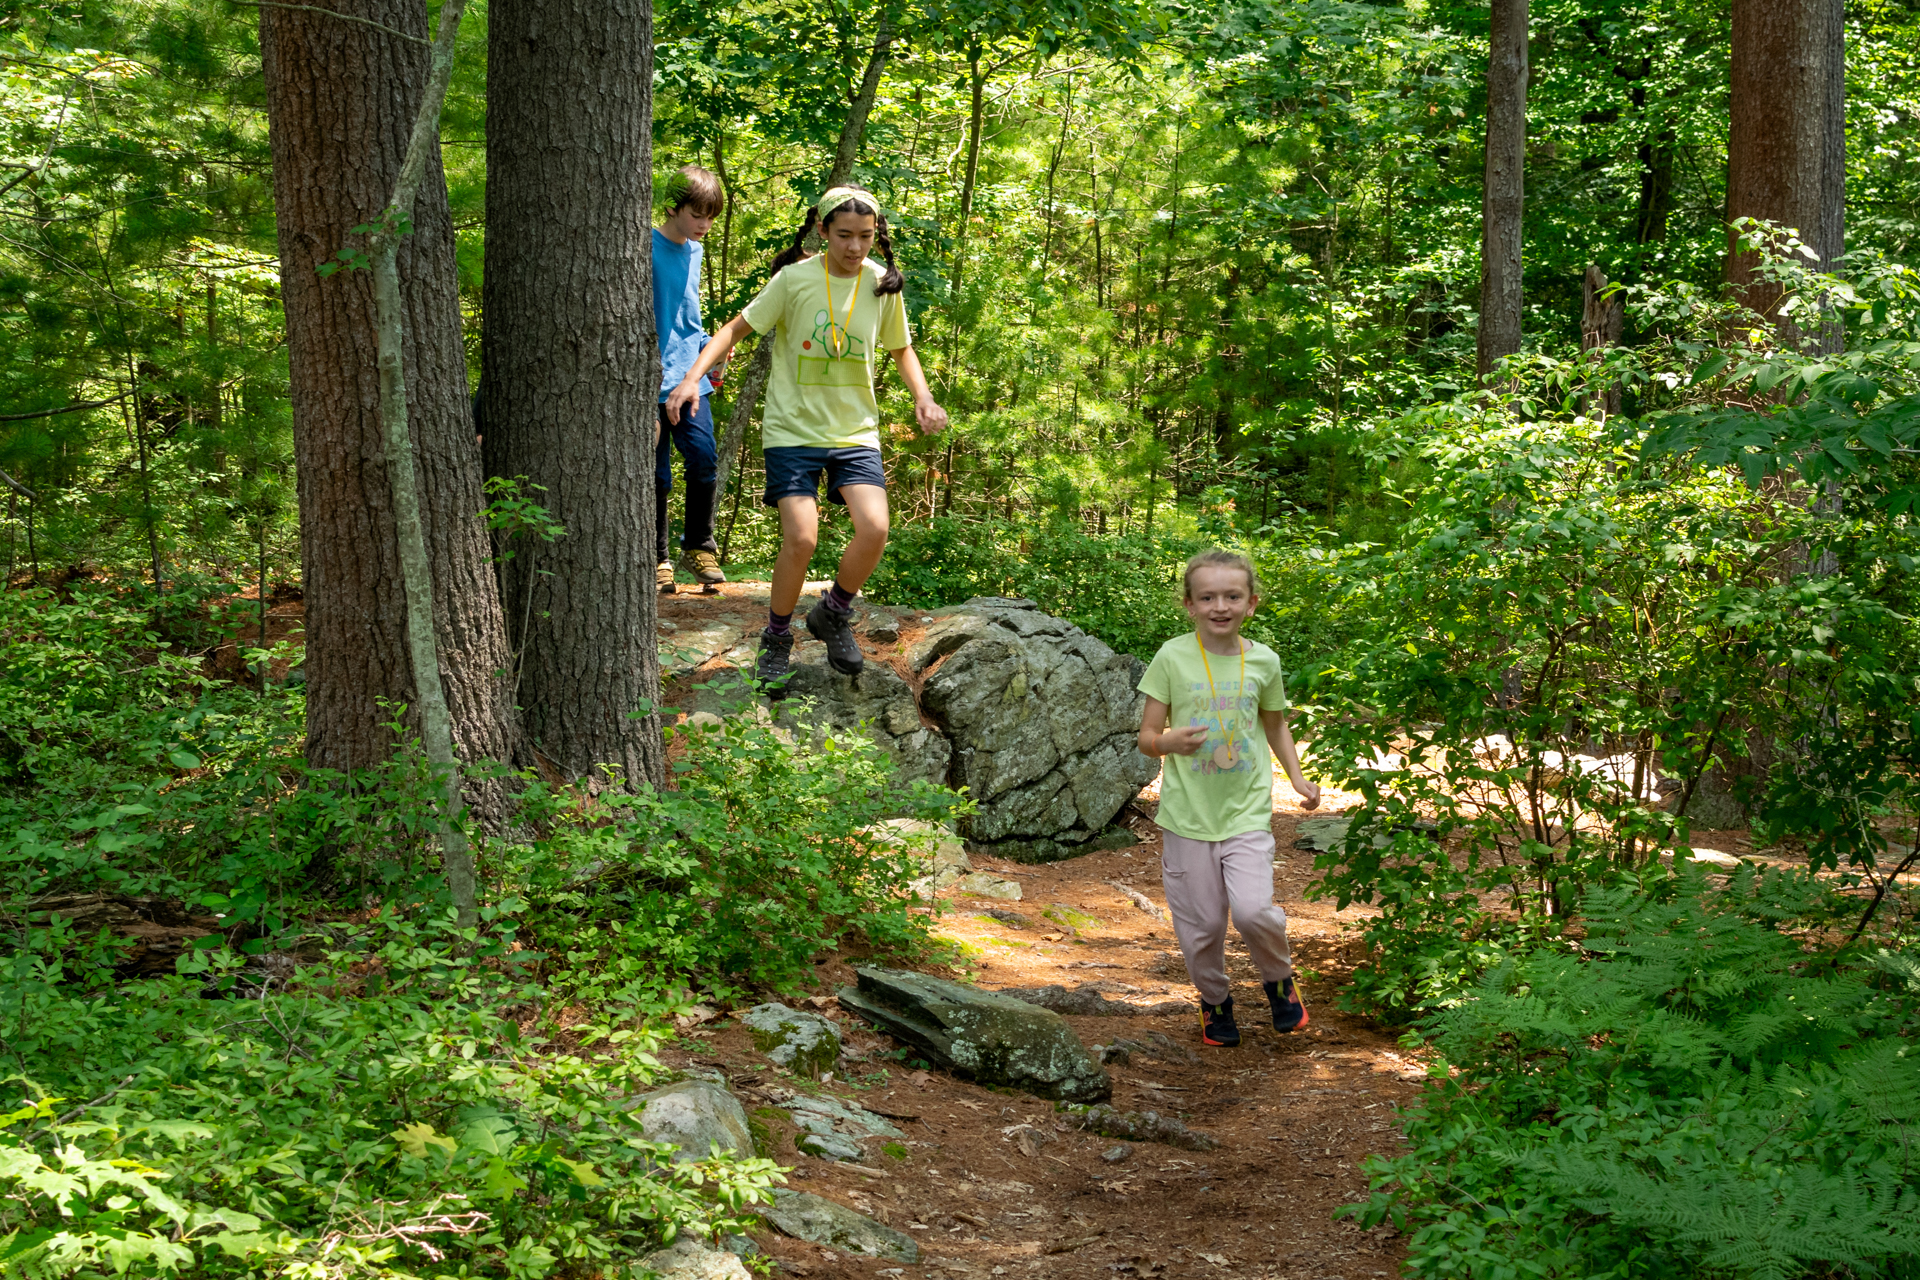 Three smiling Broadmoor campers running along a rocky trail through the forest